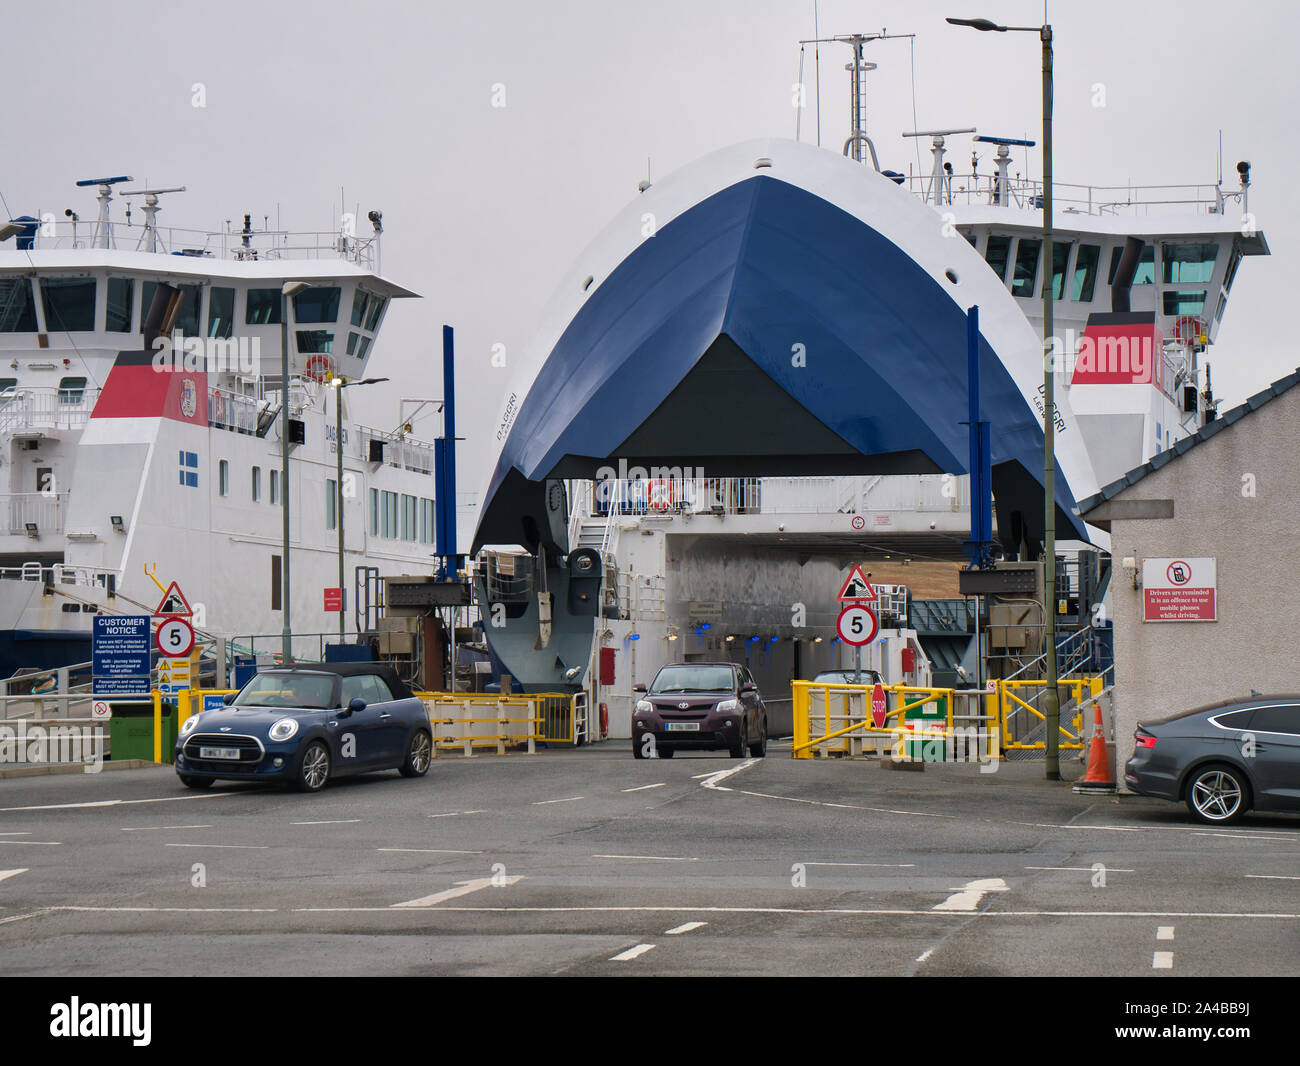 MV Daggri, a roll-on / roll-off car ferry, disembarks cars after arrival at Ulsta on the island of Yell in Shetland, Scotland, UK. Stock Photo